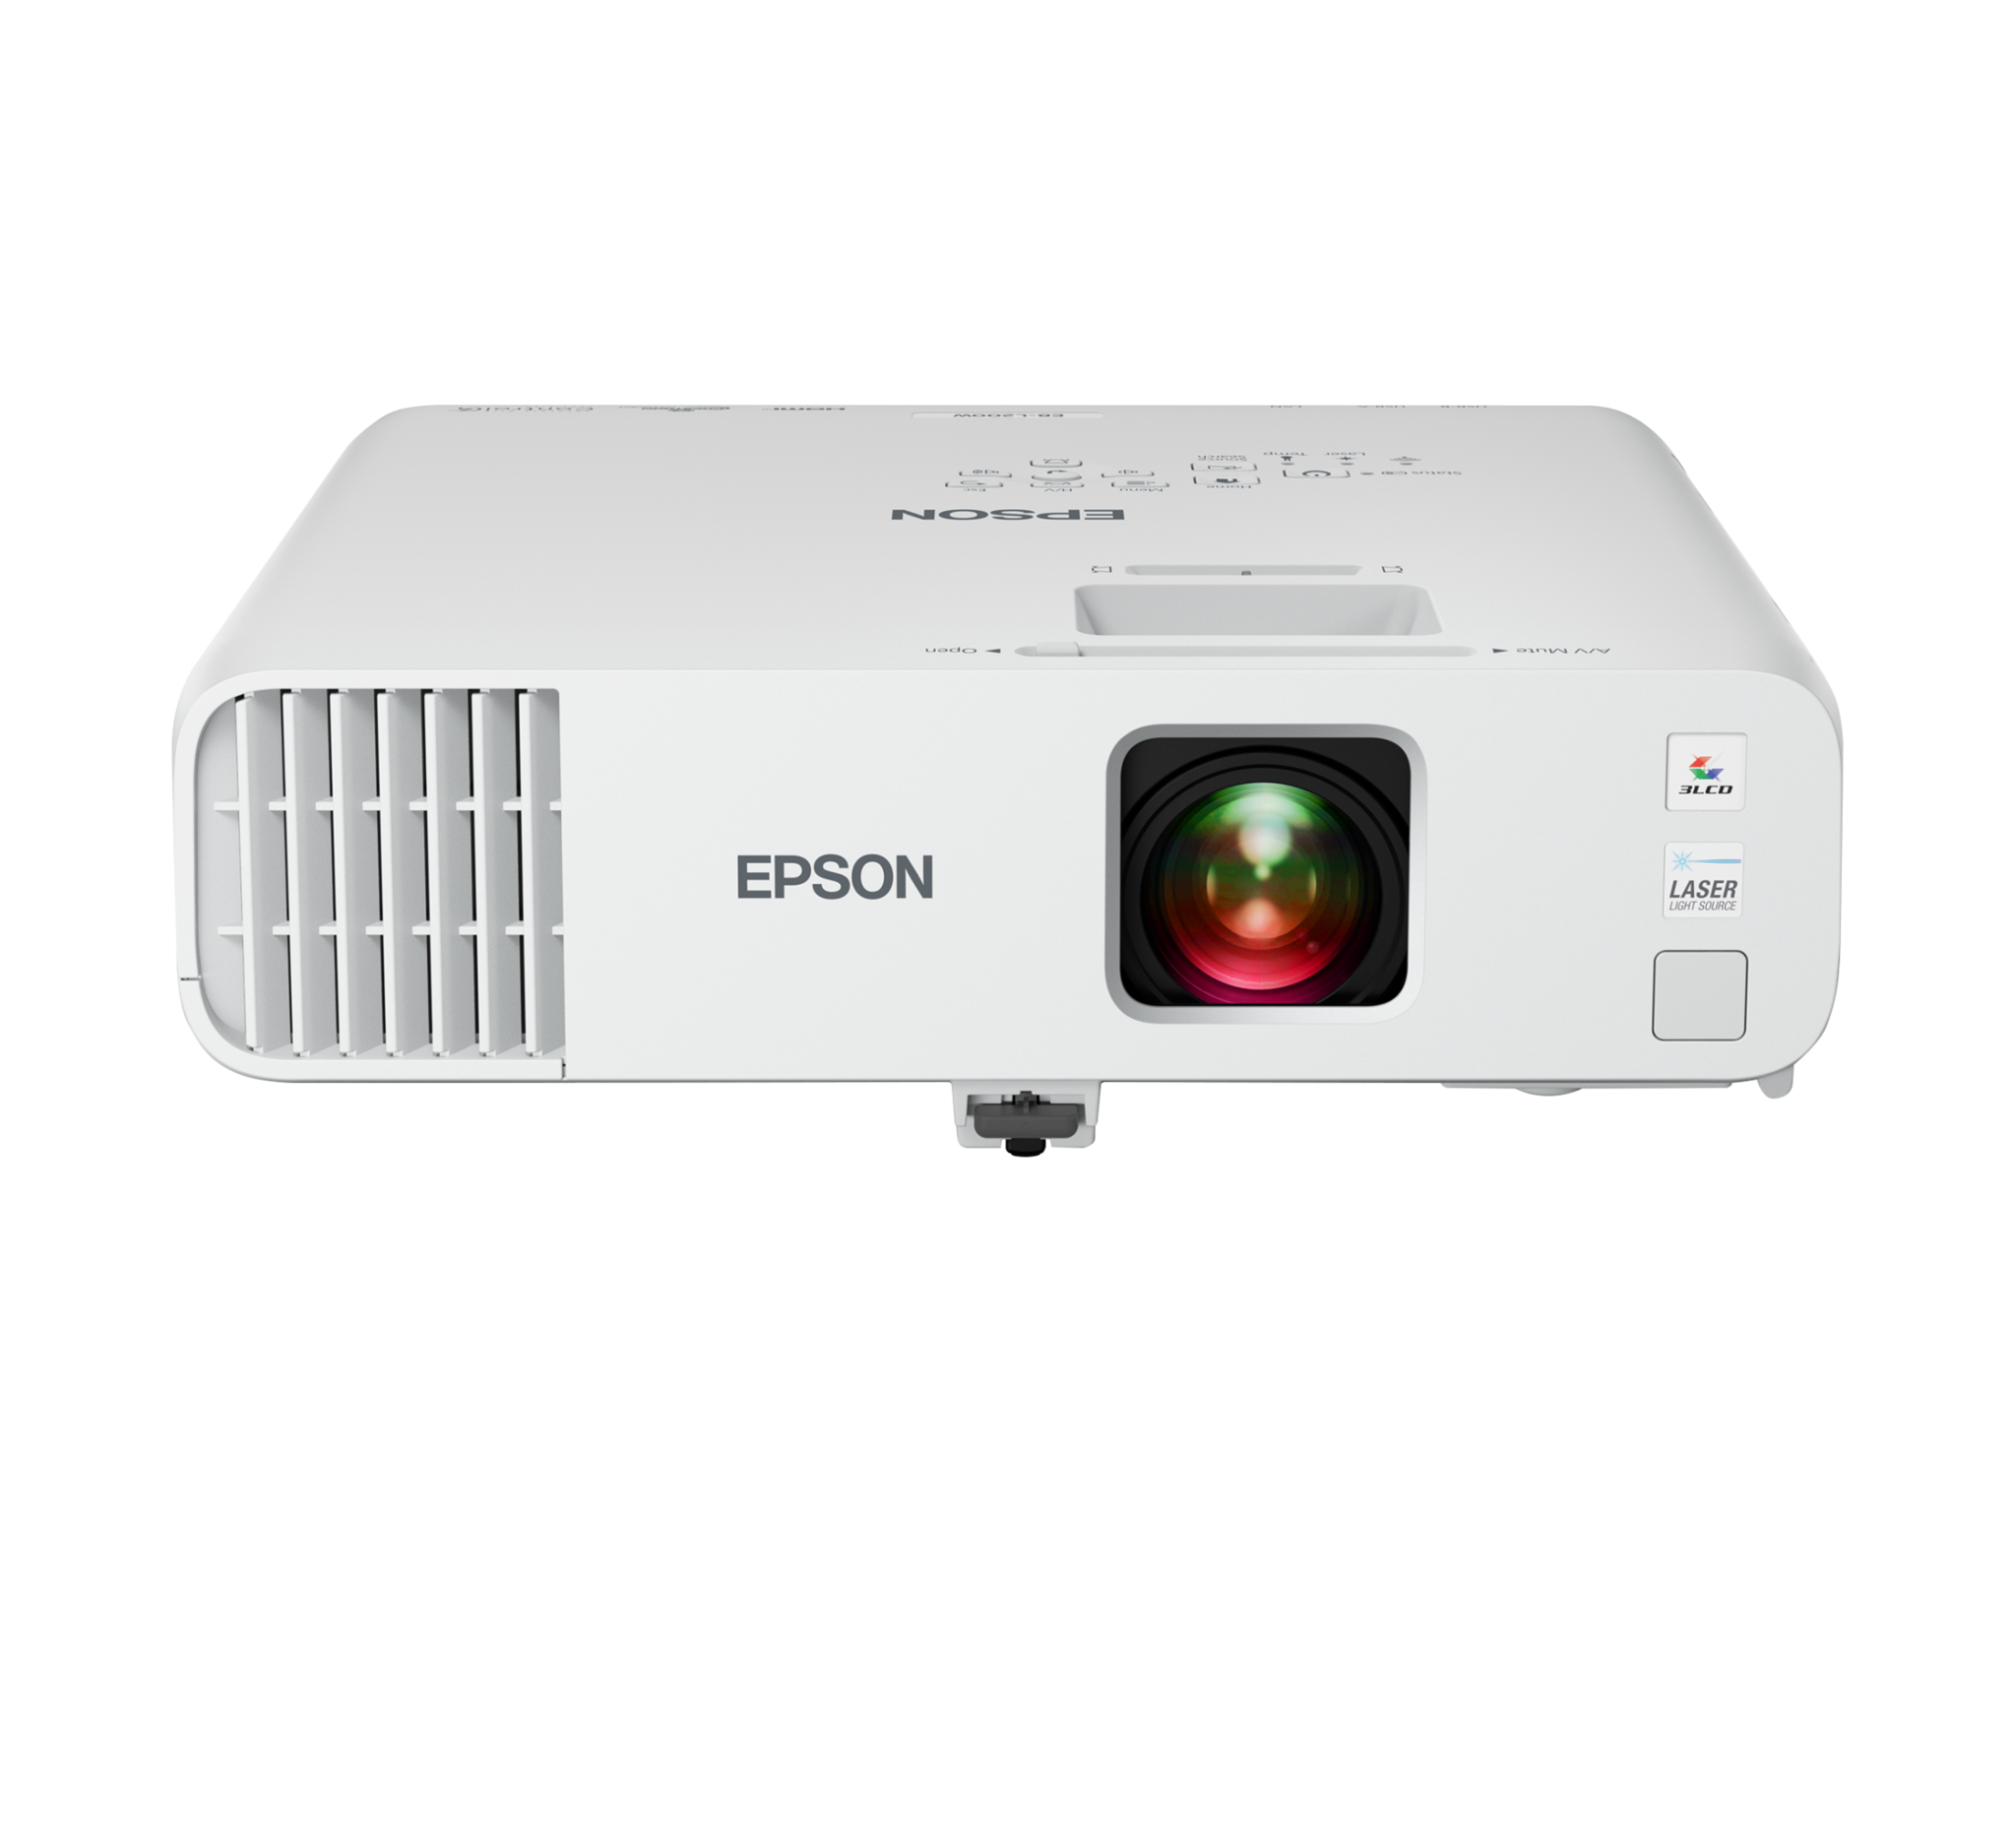 Six New Epson Powerlite Laser Projectors Now Available Avnation Tv 7786